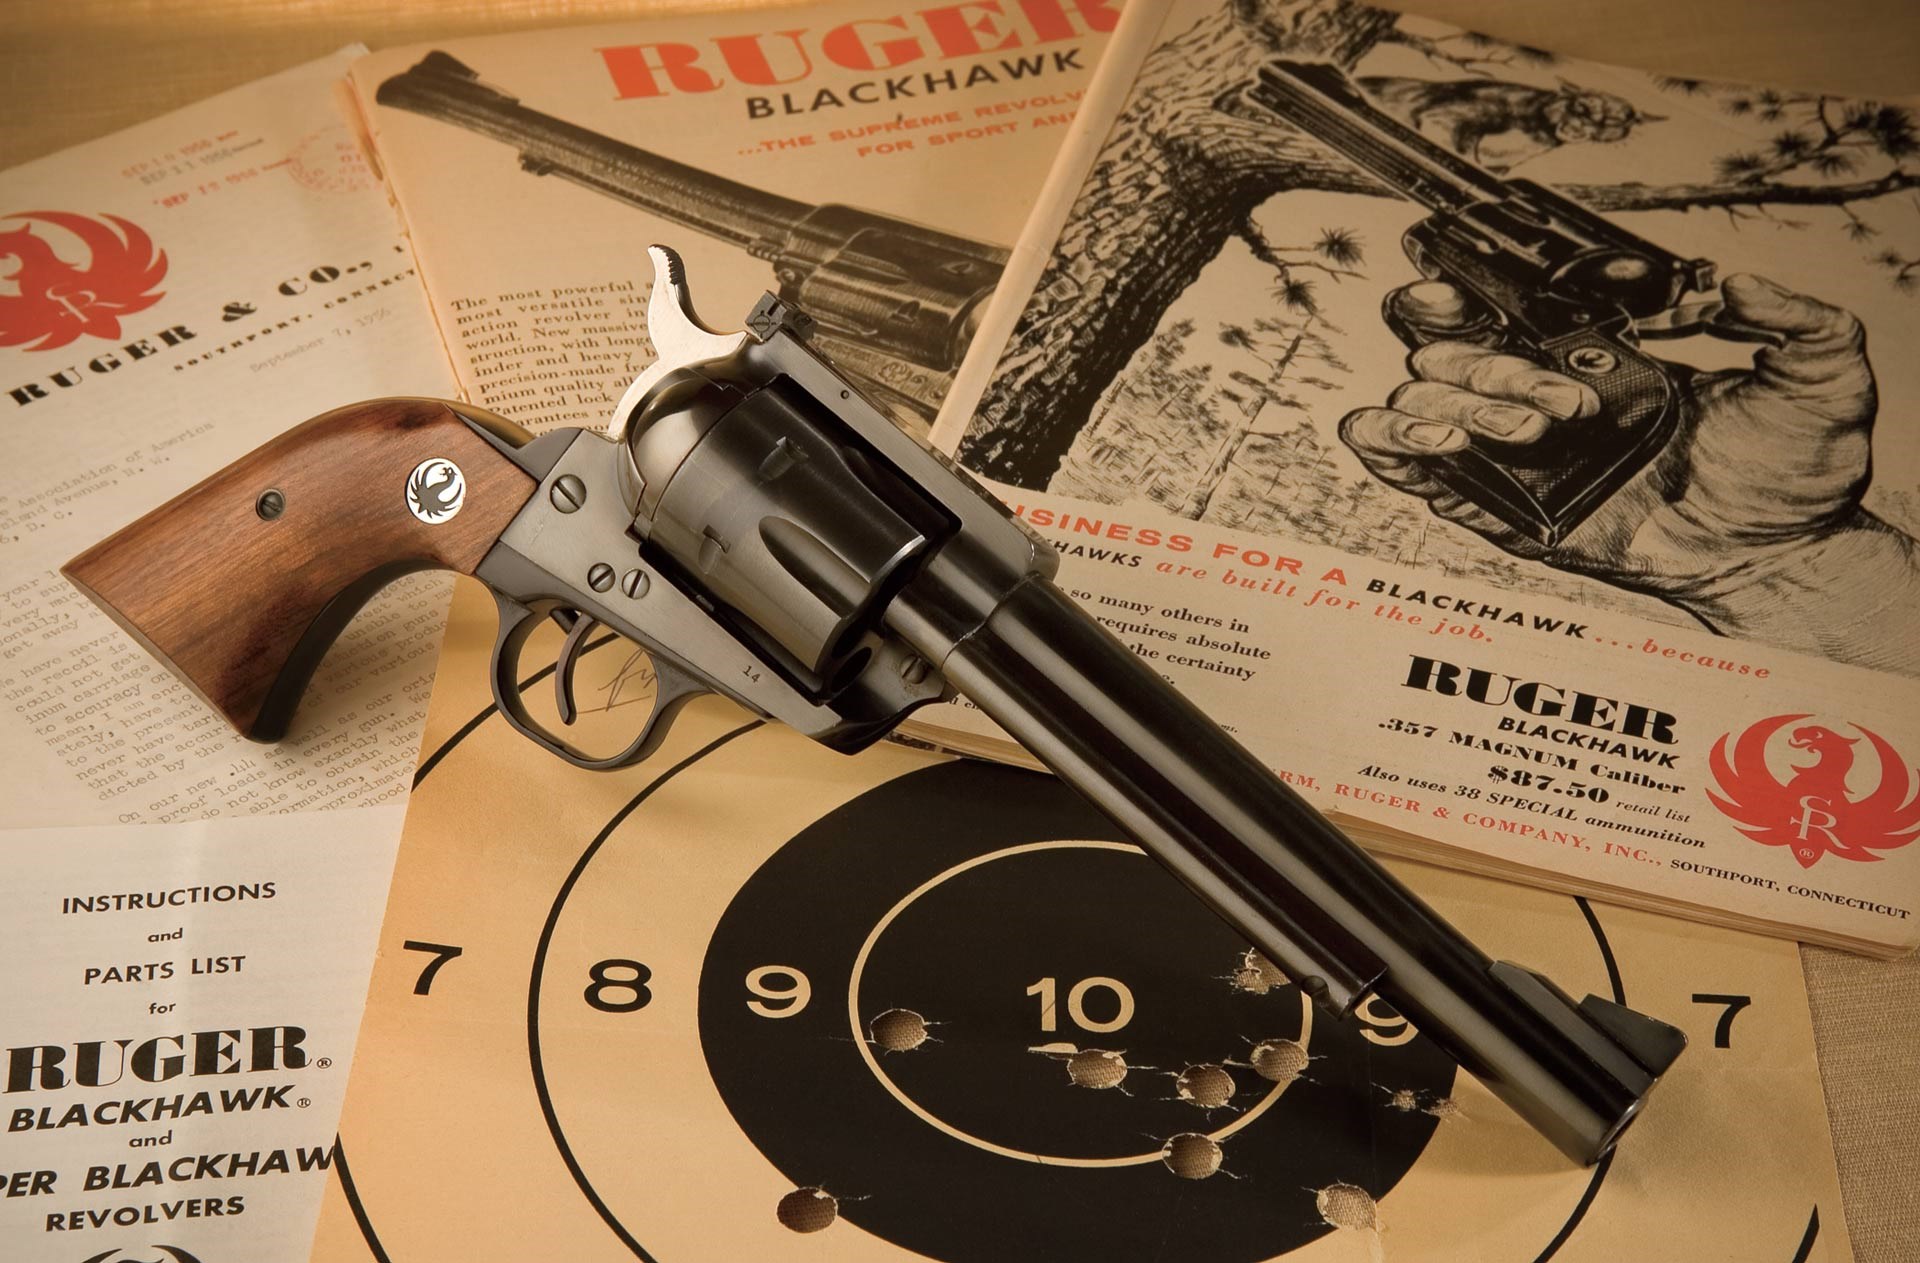 Ruger Flat Top revolver and target